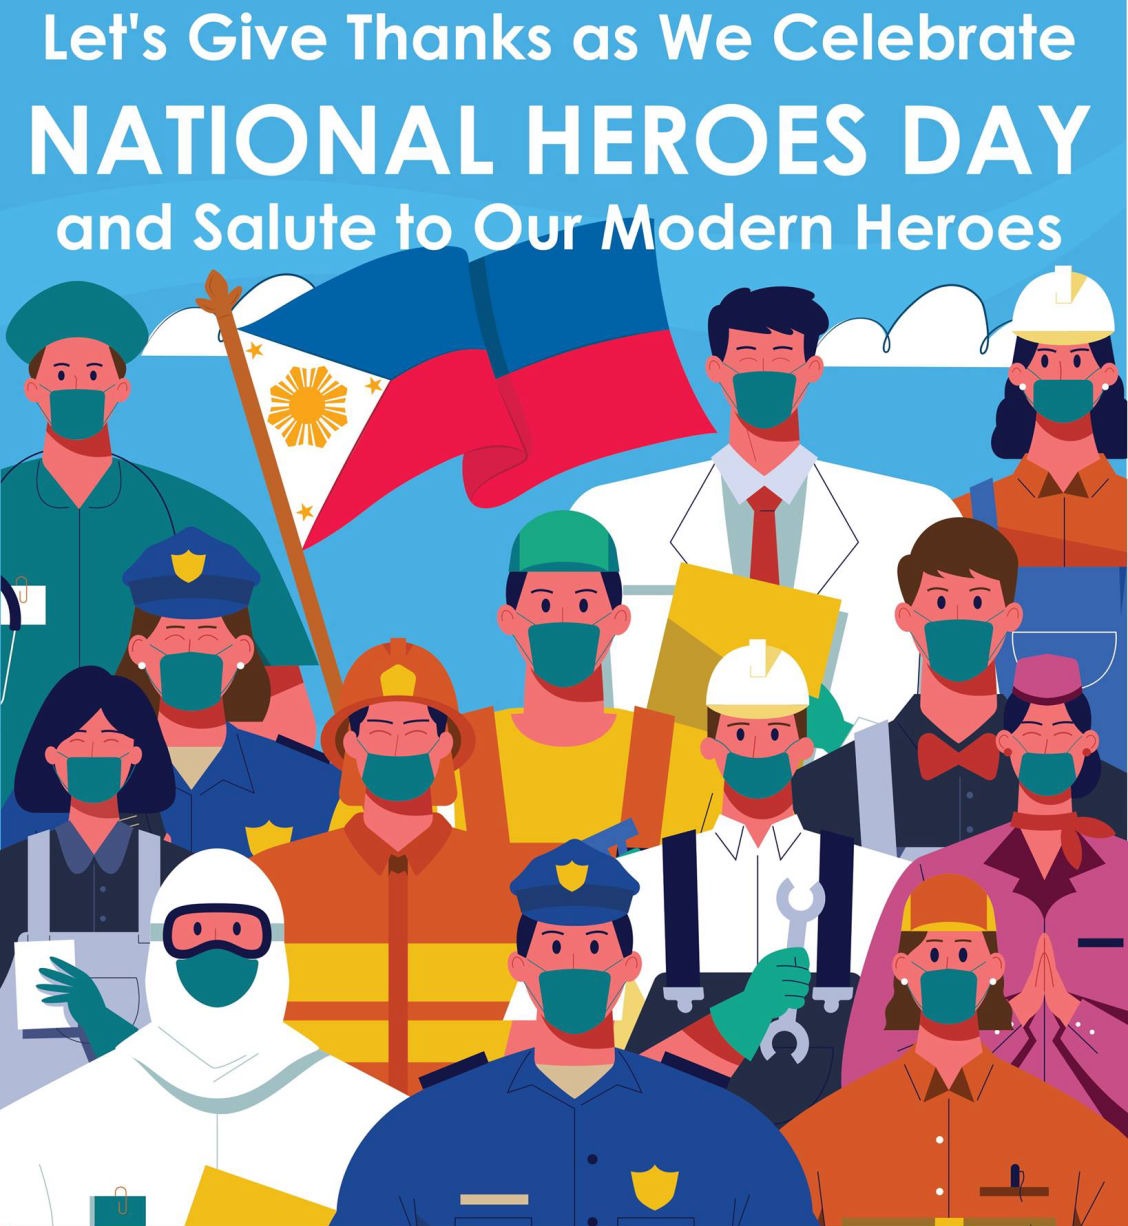 NATIONAL HEROES DAY